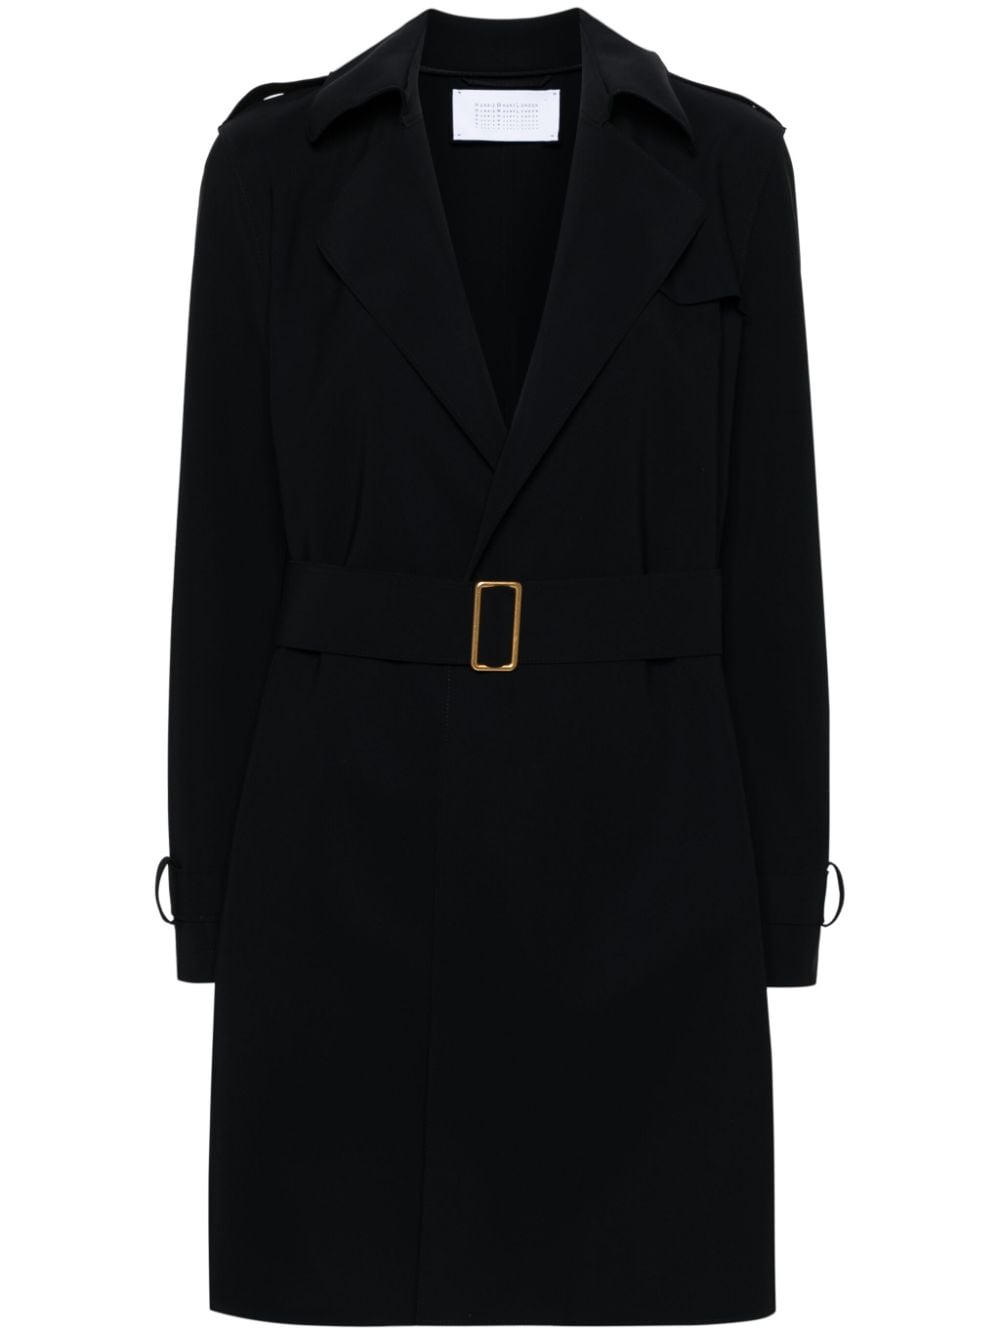 Harris Wharf London belted open-front trench coat - Black von Harris Wharf London